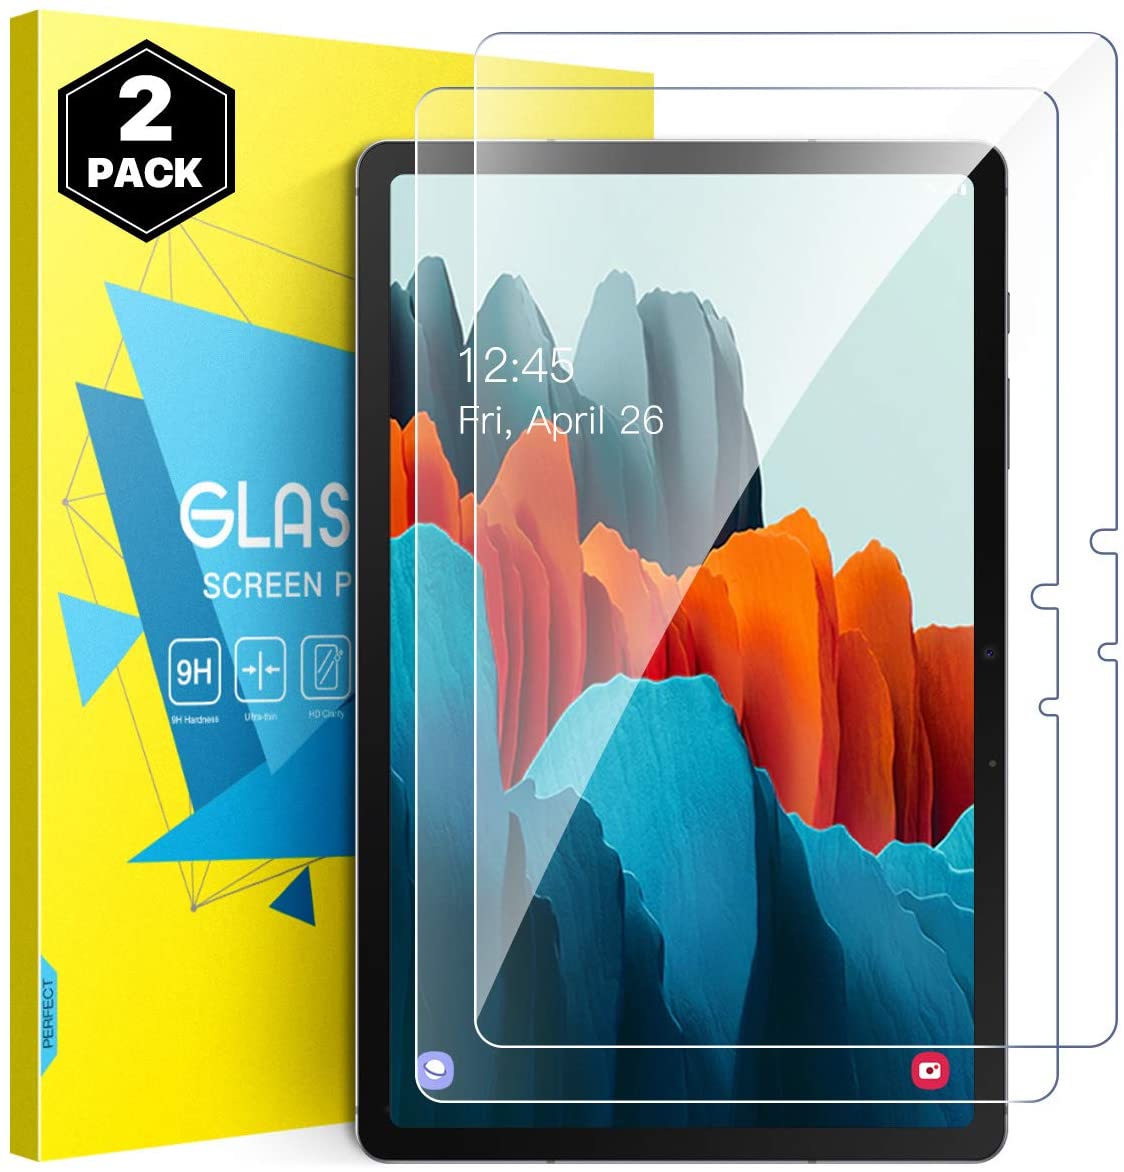 https://www.androidcentral.com/sites/androidcentral.com/files/article_images/2020/09/moko-screen-protector-galaxy-tab-s7.jpg